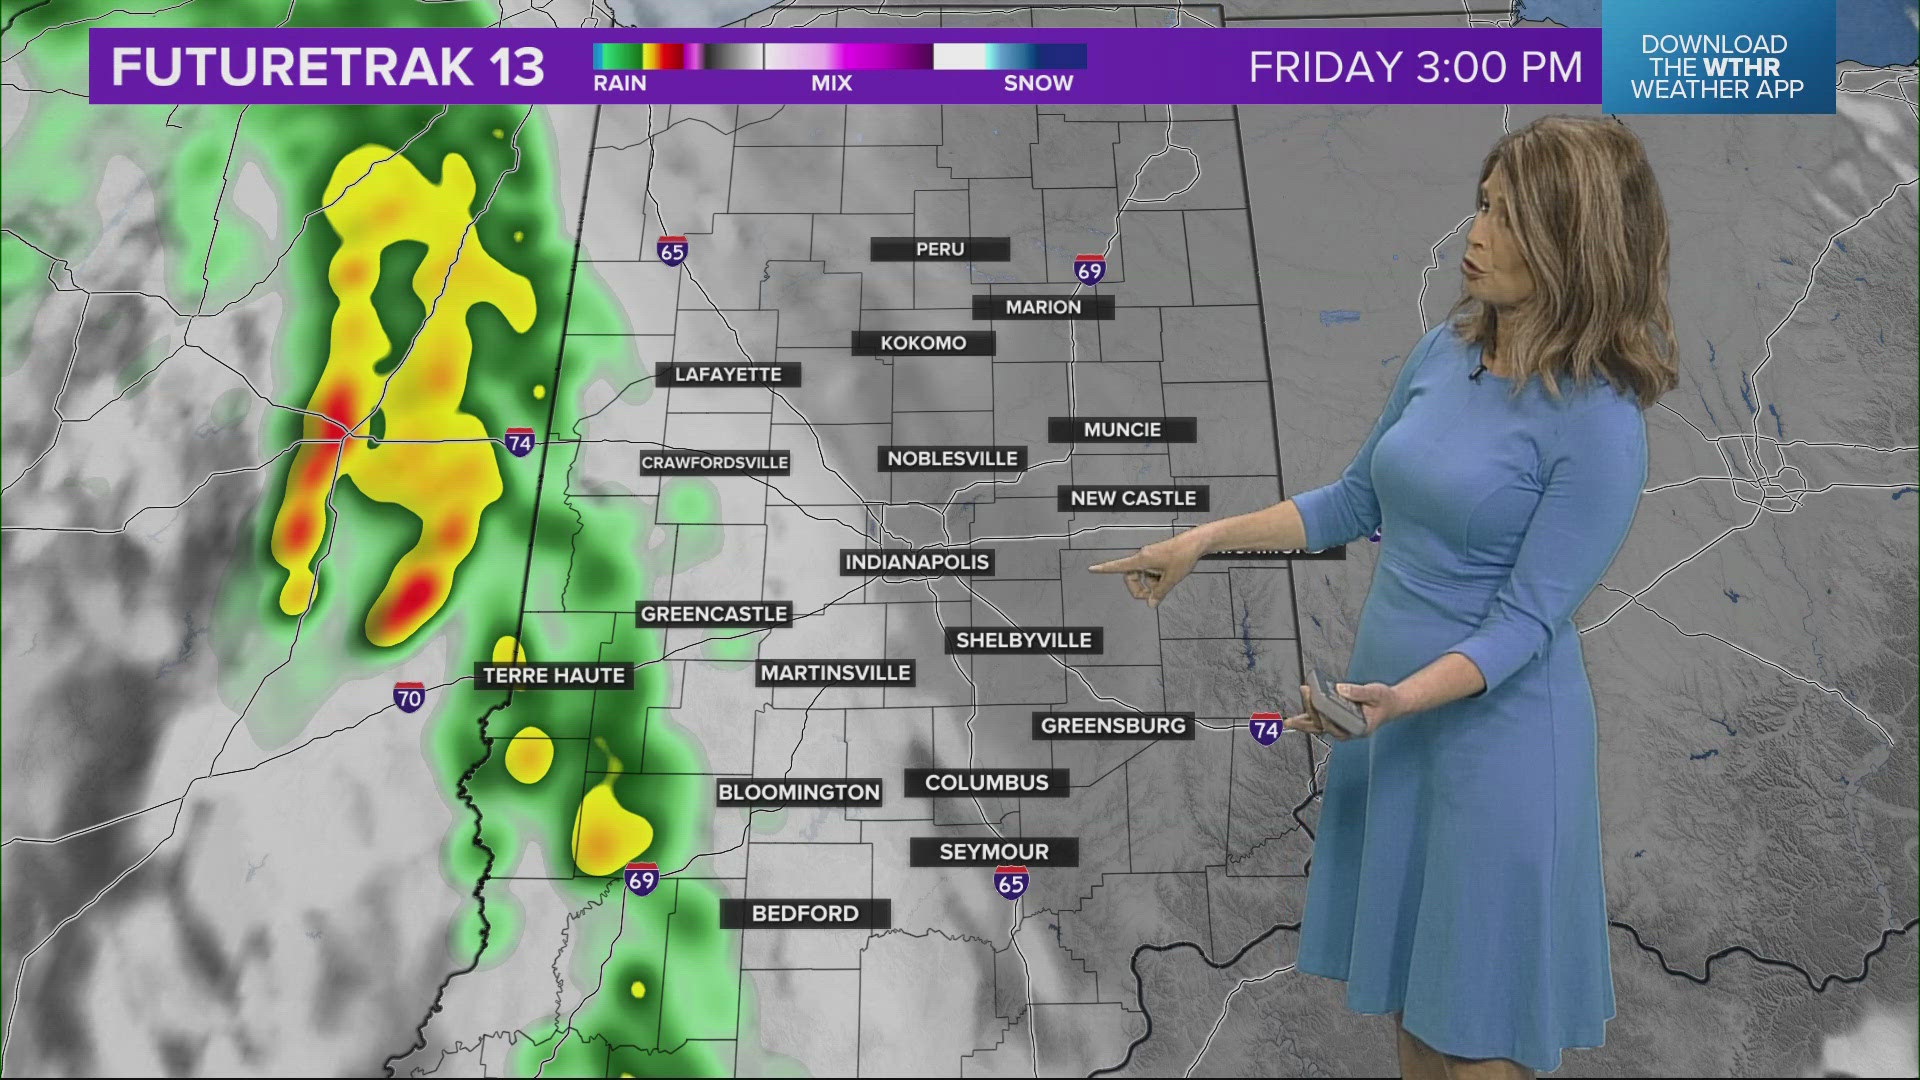 13News meteorologist Angela Buchman is tracking a storm front that could bring heavy rain to central Indiana on Friday.